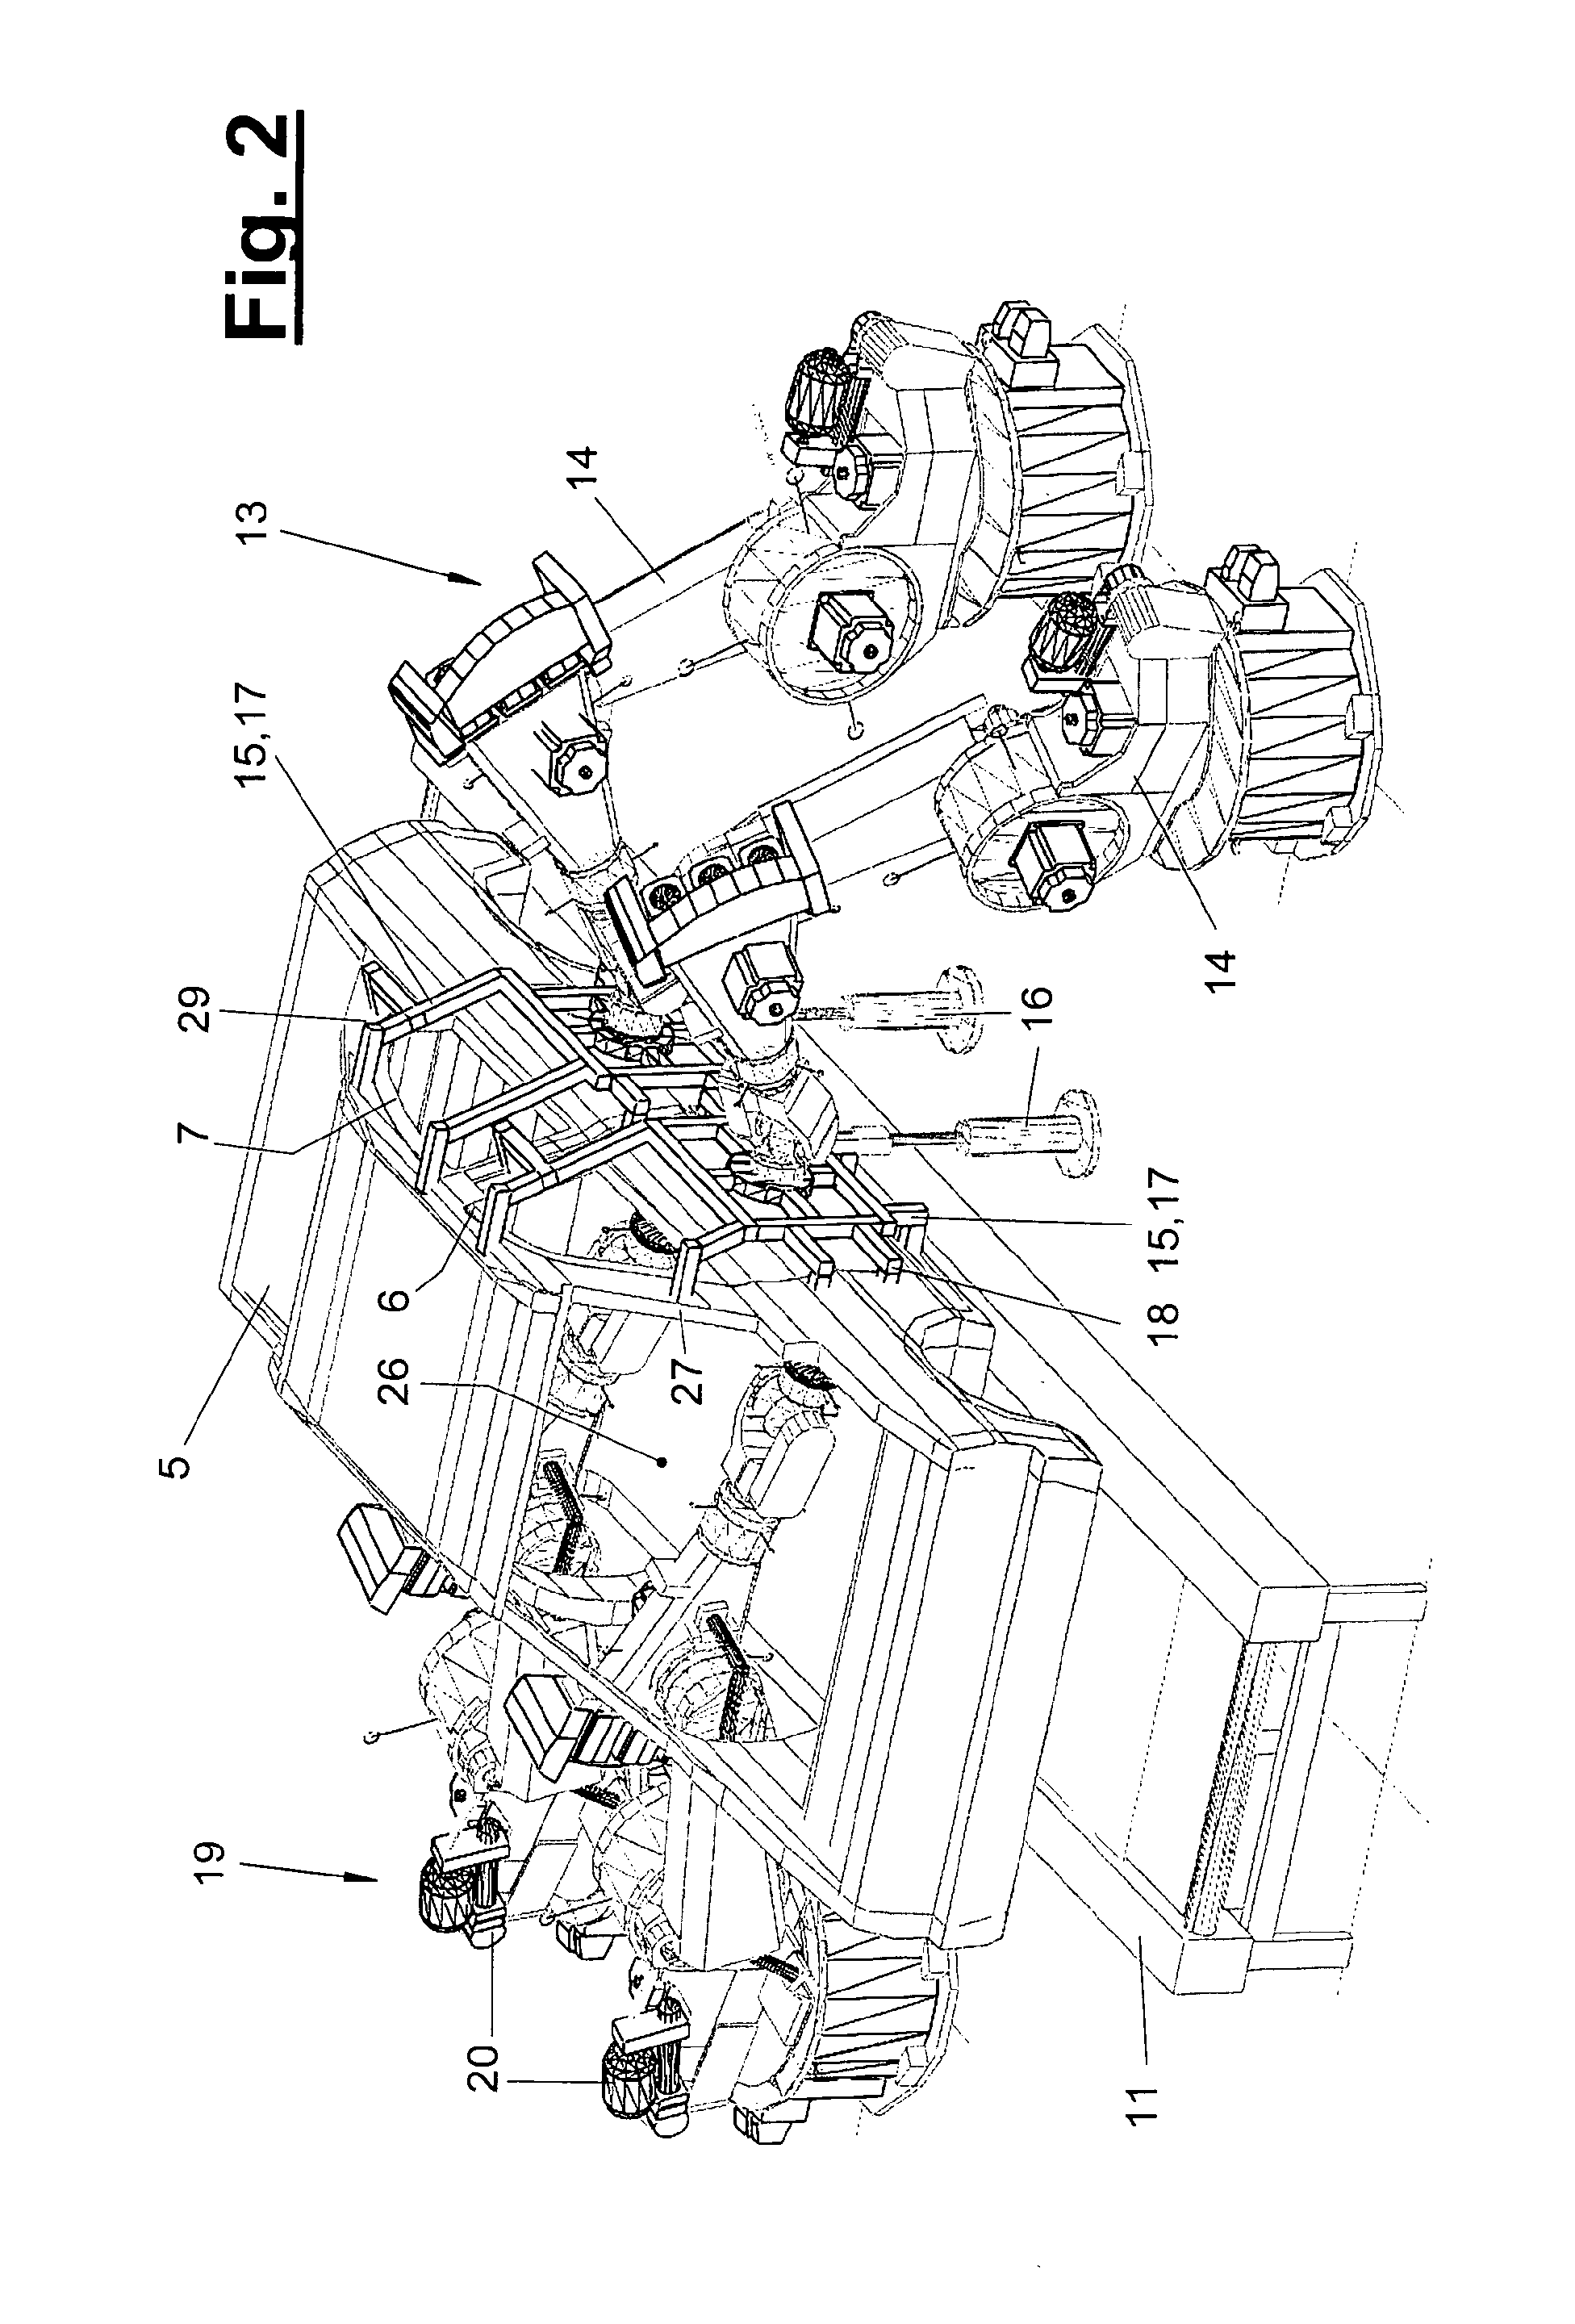 Mounting Process and Mounting Unit for Doors on Vehicle Bodies